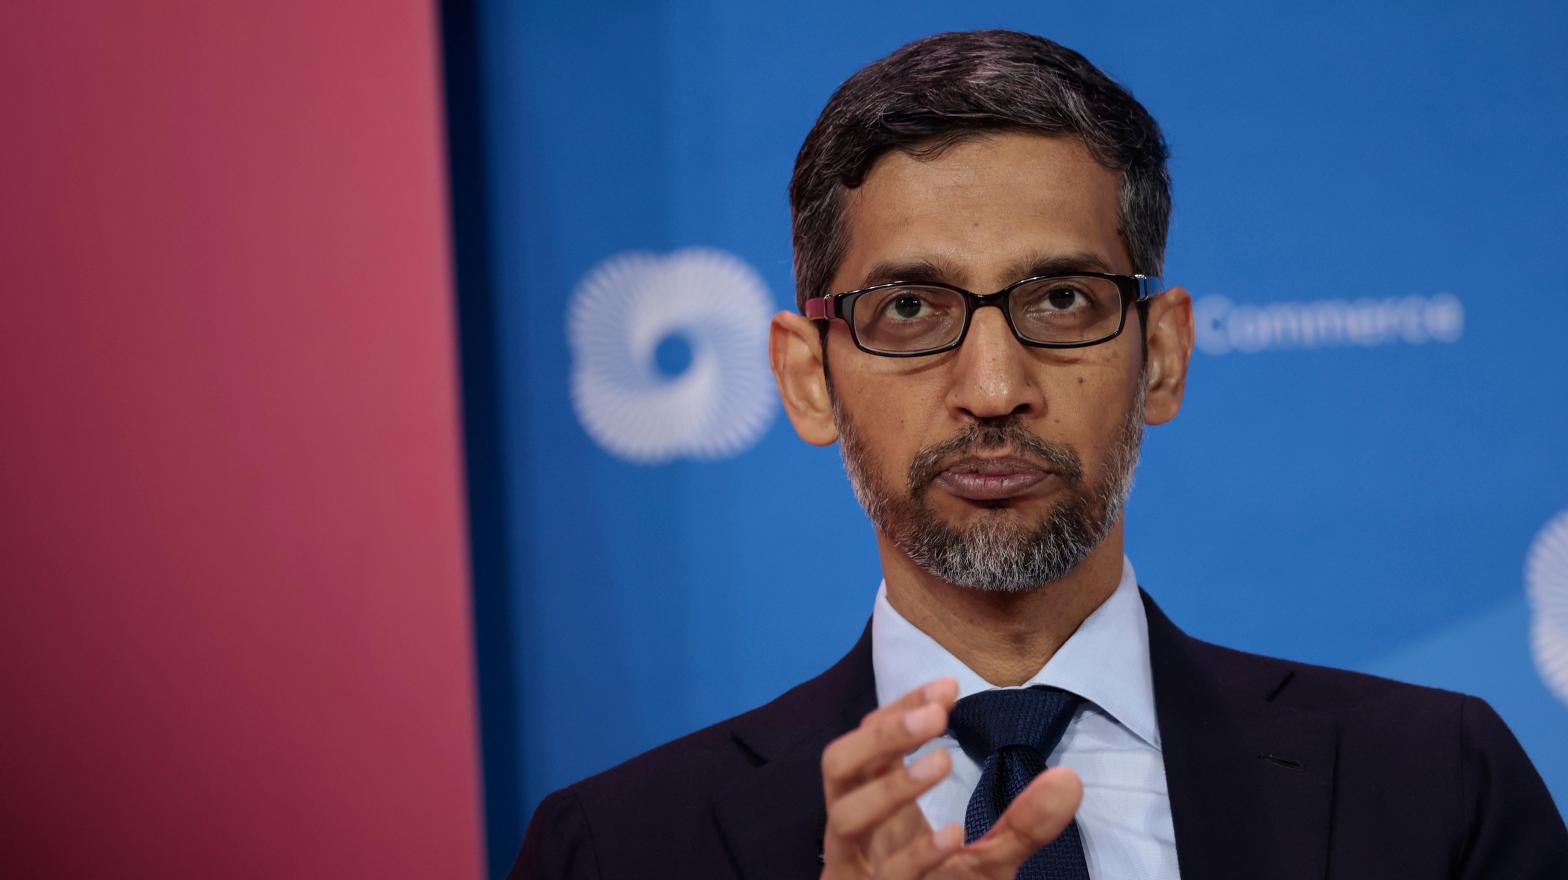 Google CEO Sundar Pichai told employees they already have 'thousands' of workers 'dogfooding' their Bard AI. (Photo: Anna Moneymaker, Getty Images)